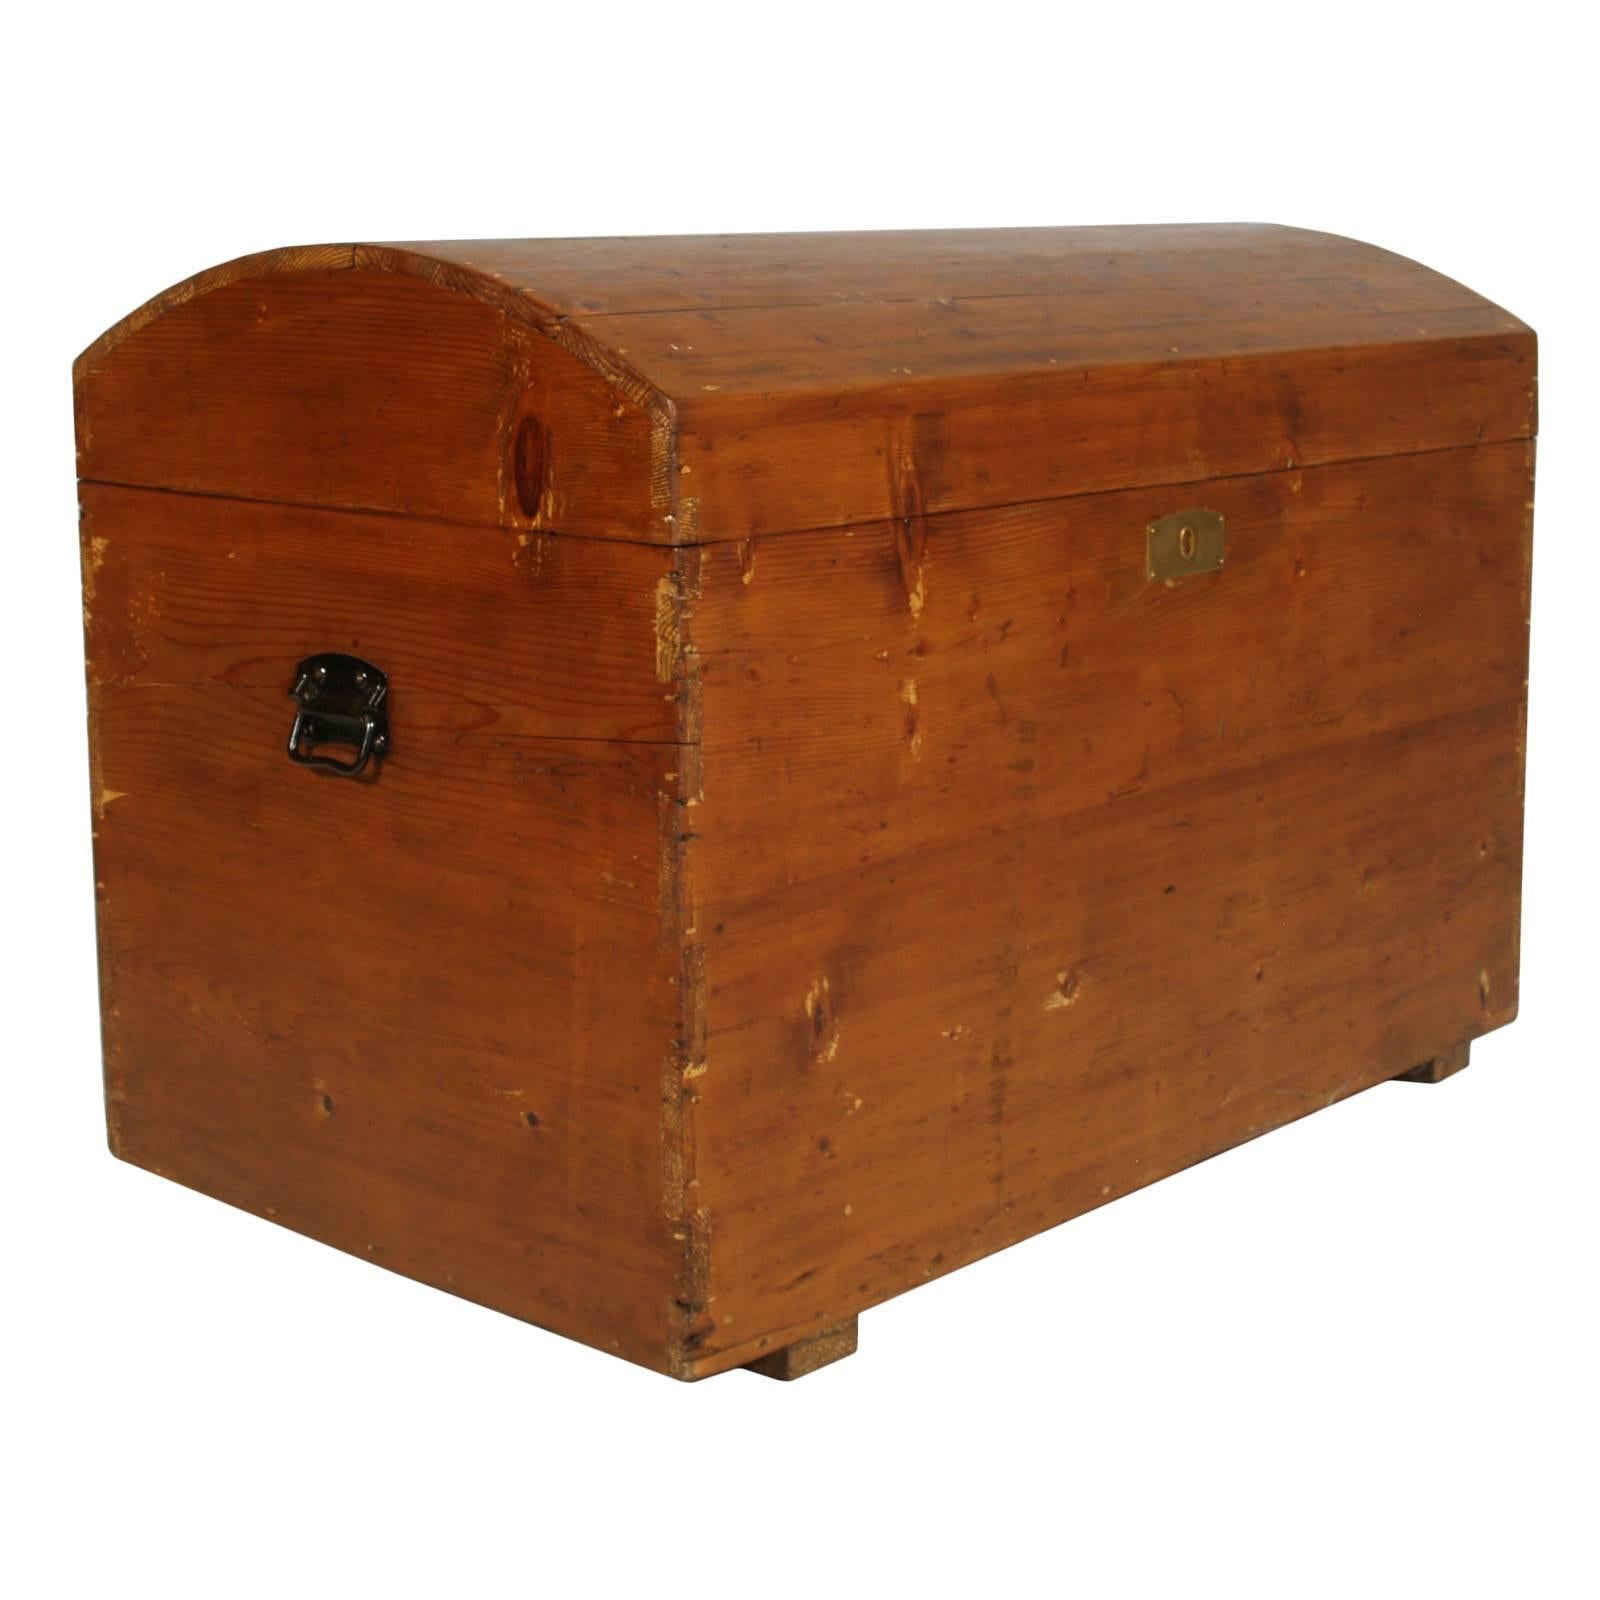 19th Century Traveling Trunk Chest in Solid Wood Restored and Polished to Wax